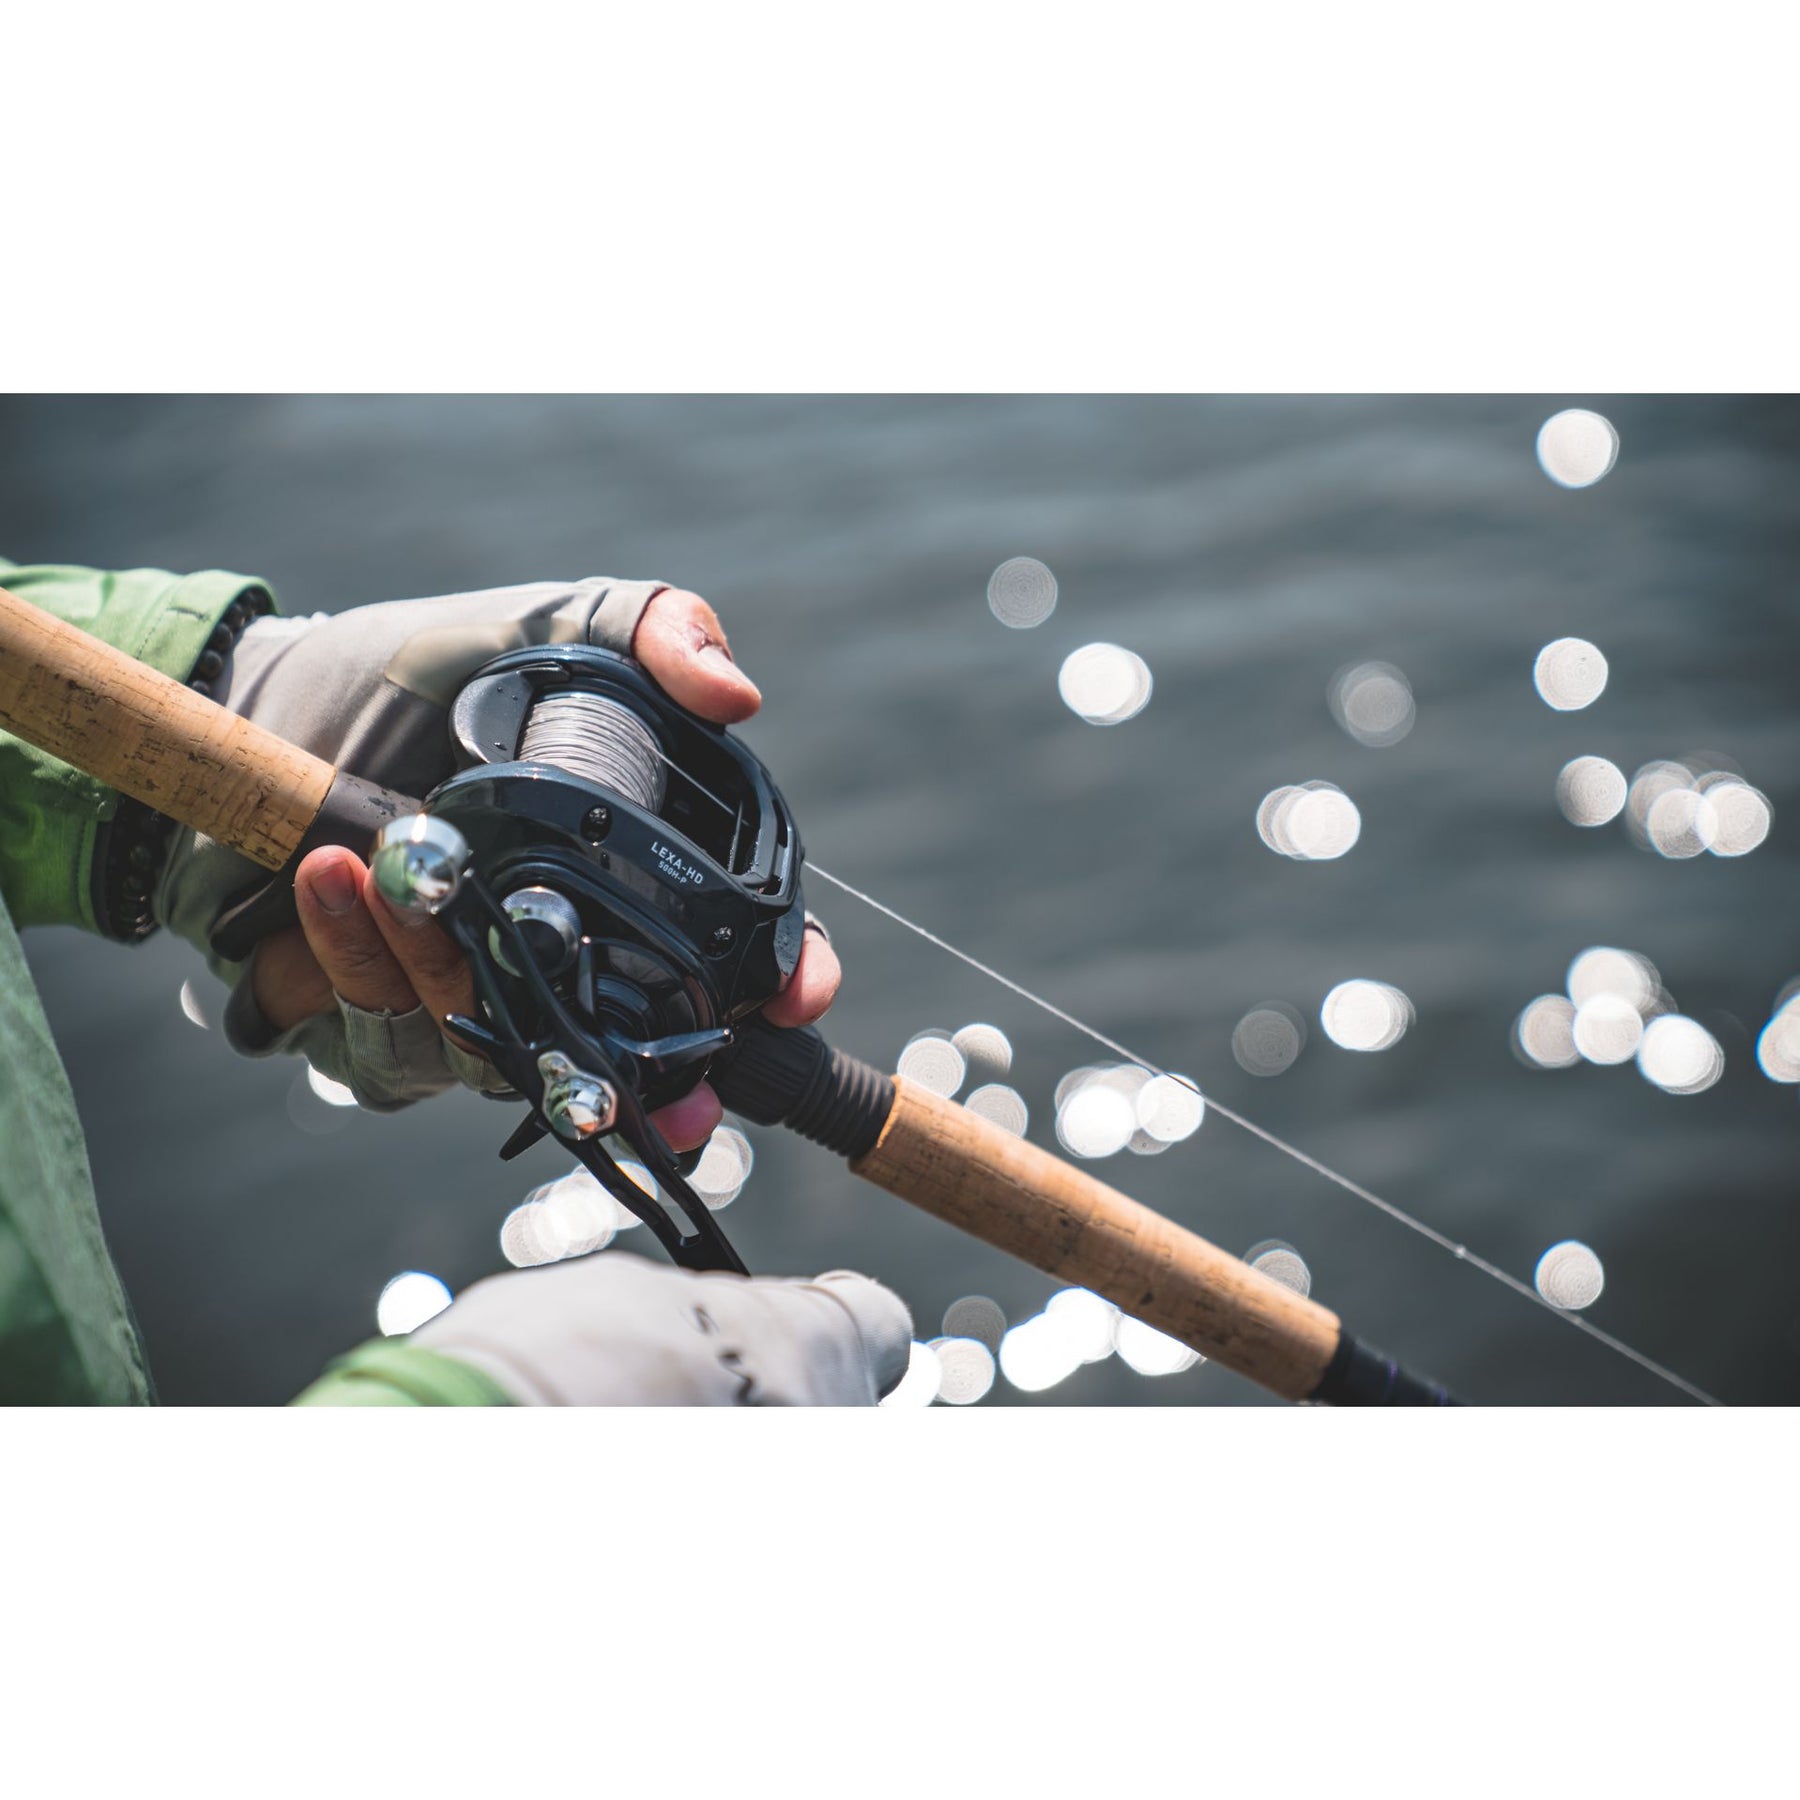 Daiwa Lexa 100Hs First Thoughts. - Fishing Rods, Reels, Line